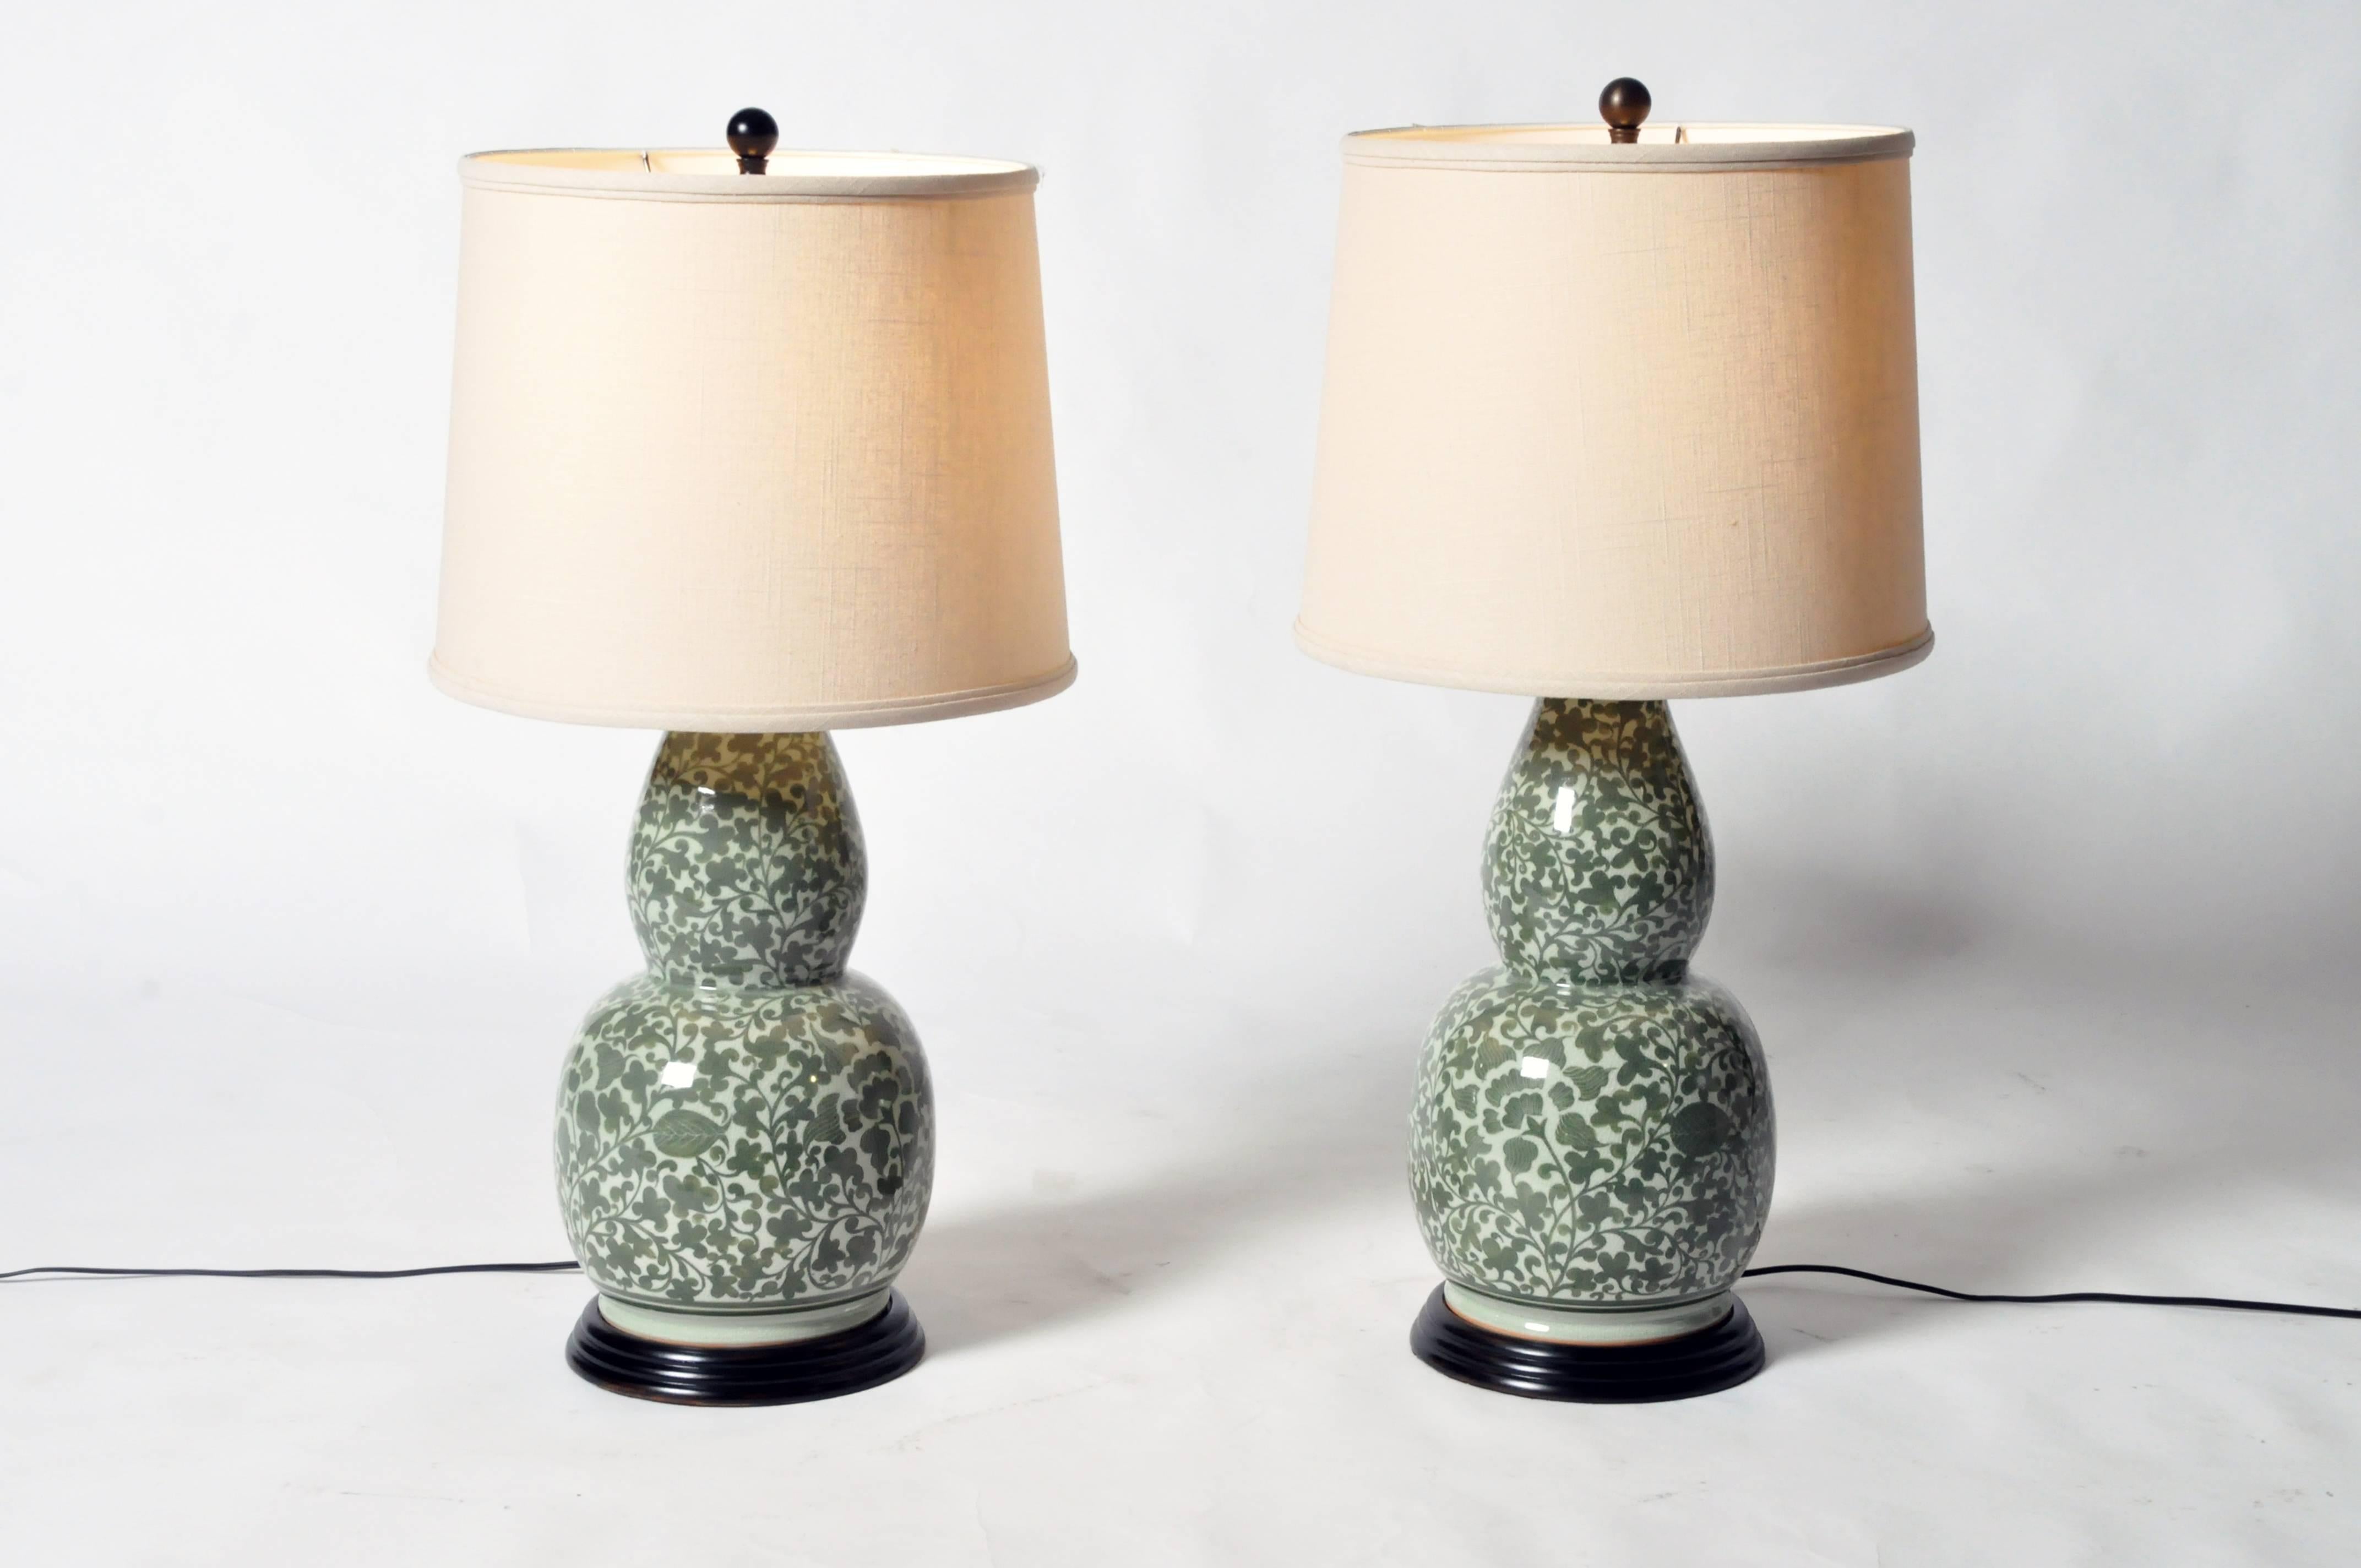 These beautiful floral motif double gourd form vase are from Thailand and were converted to table lamps.